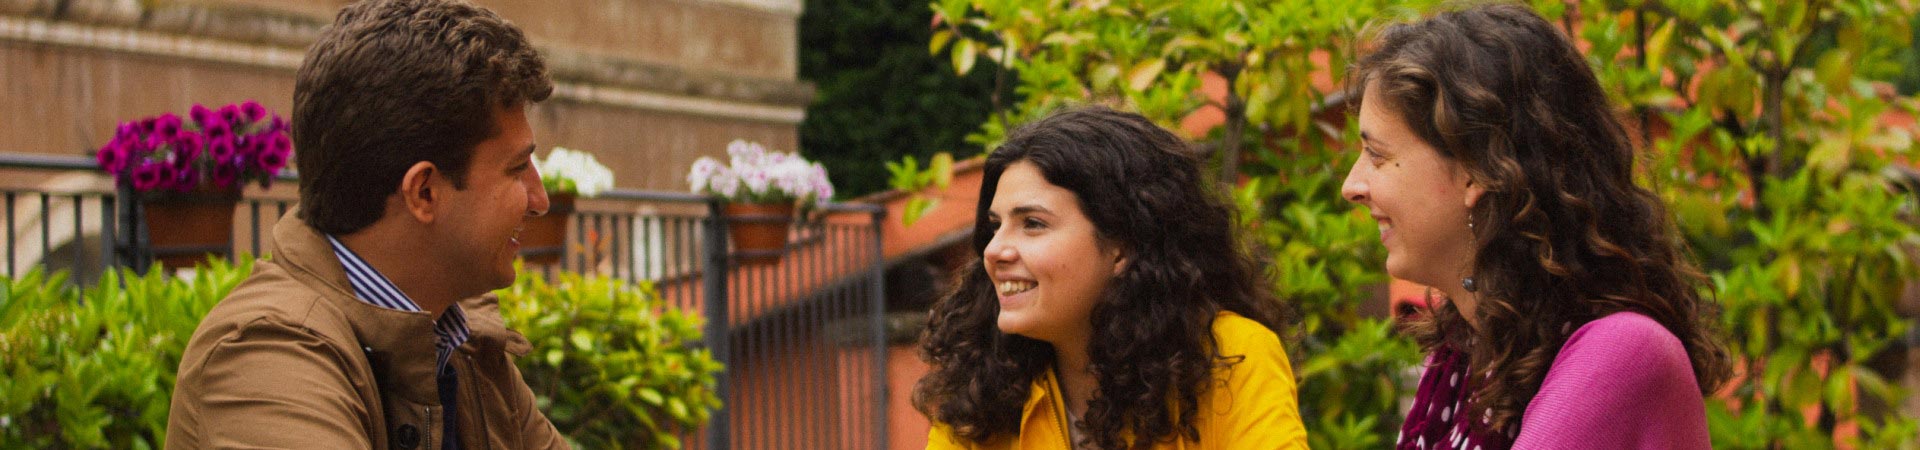 Student Life in Rome | Experience Studying Abroad in Italy